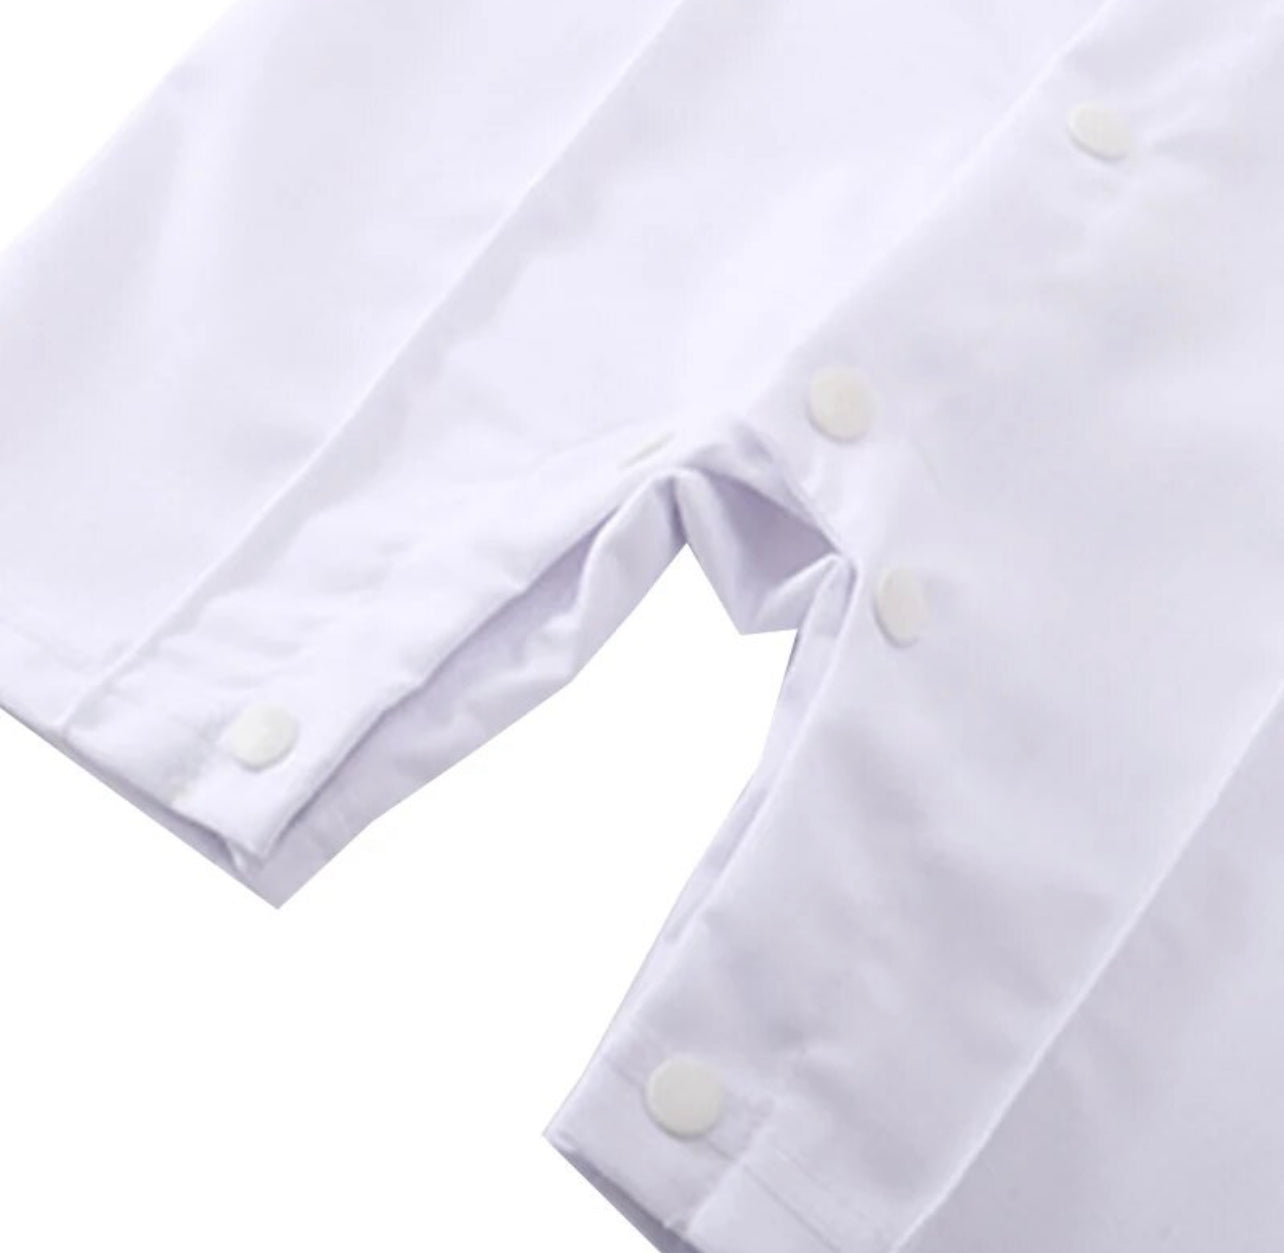 0-24 Months Baby Boys Formal Suit, White Romper, Tie